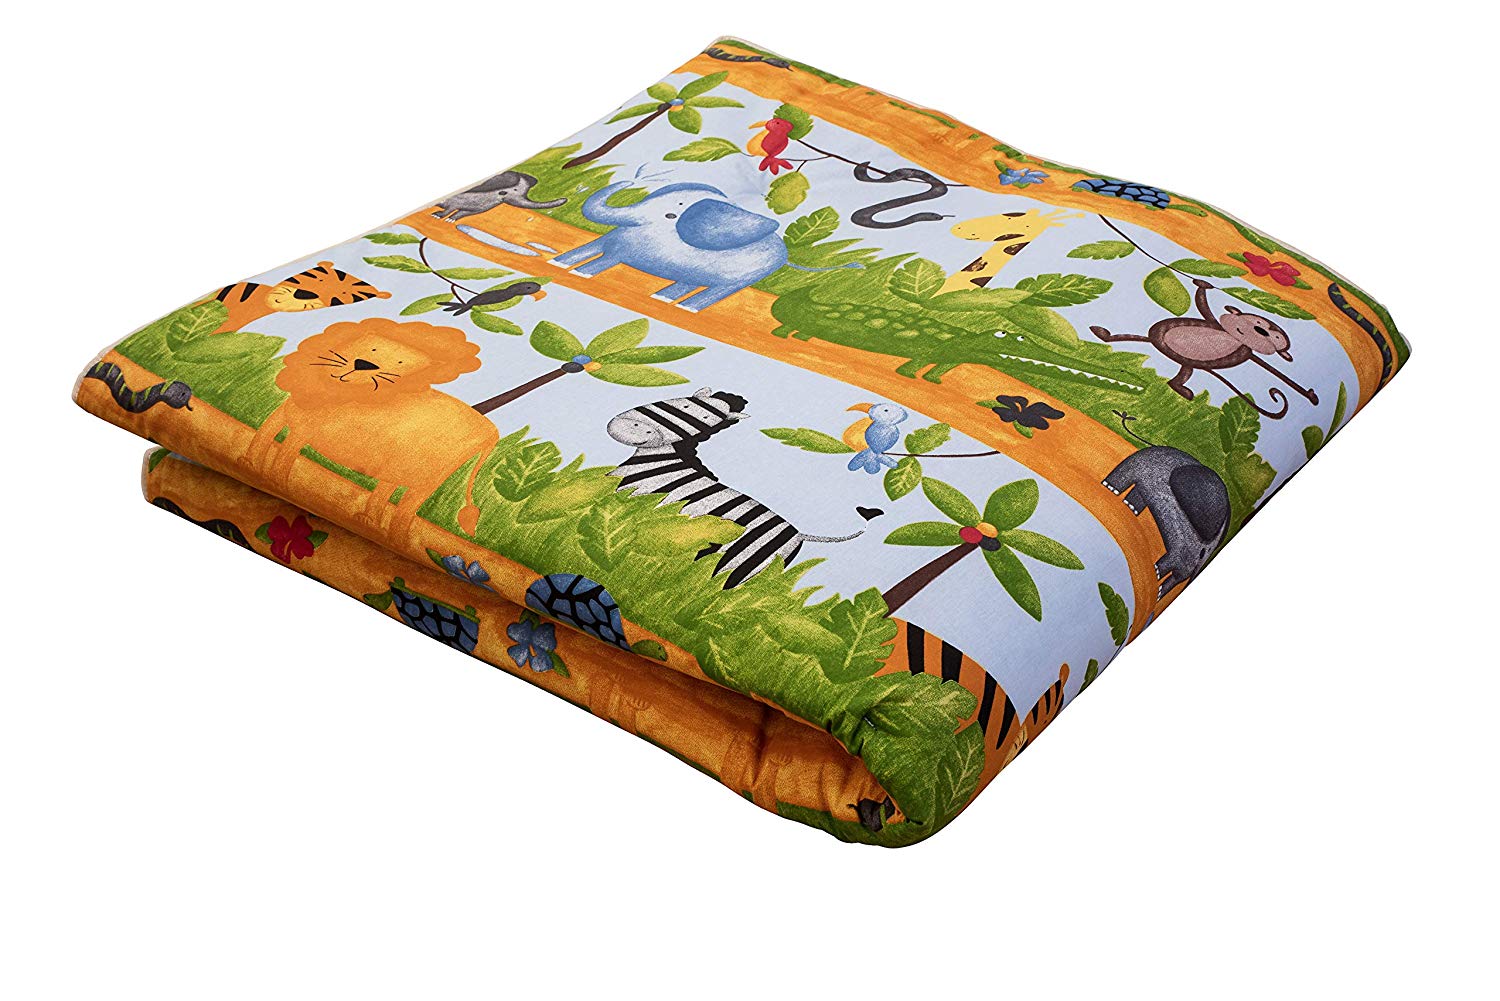 Ideenreich 2014 Size 1 Large Beautiful Crawling and Playing Blanket 135 x 190 cm